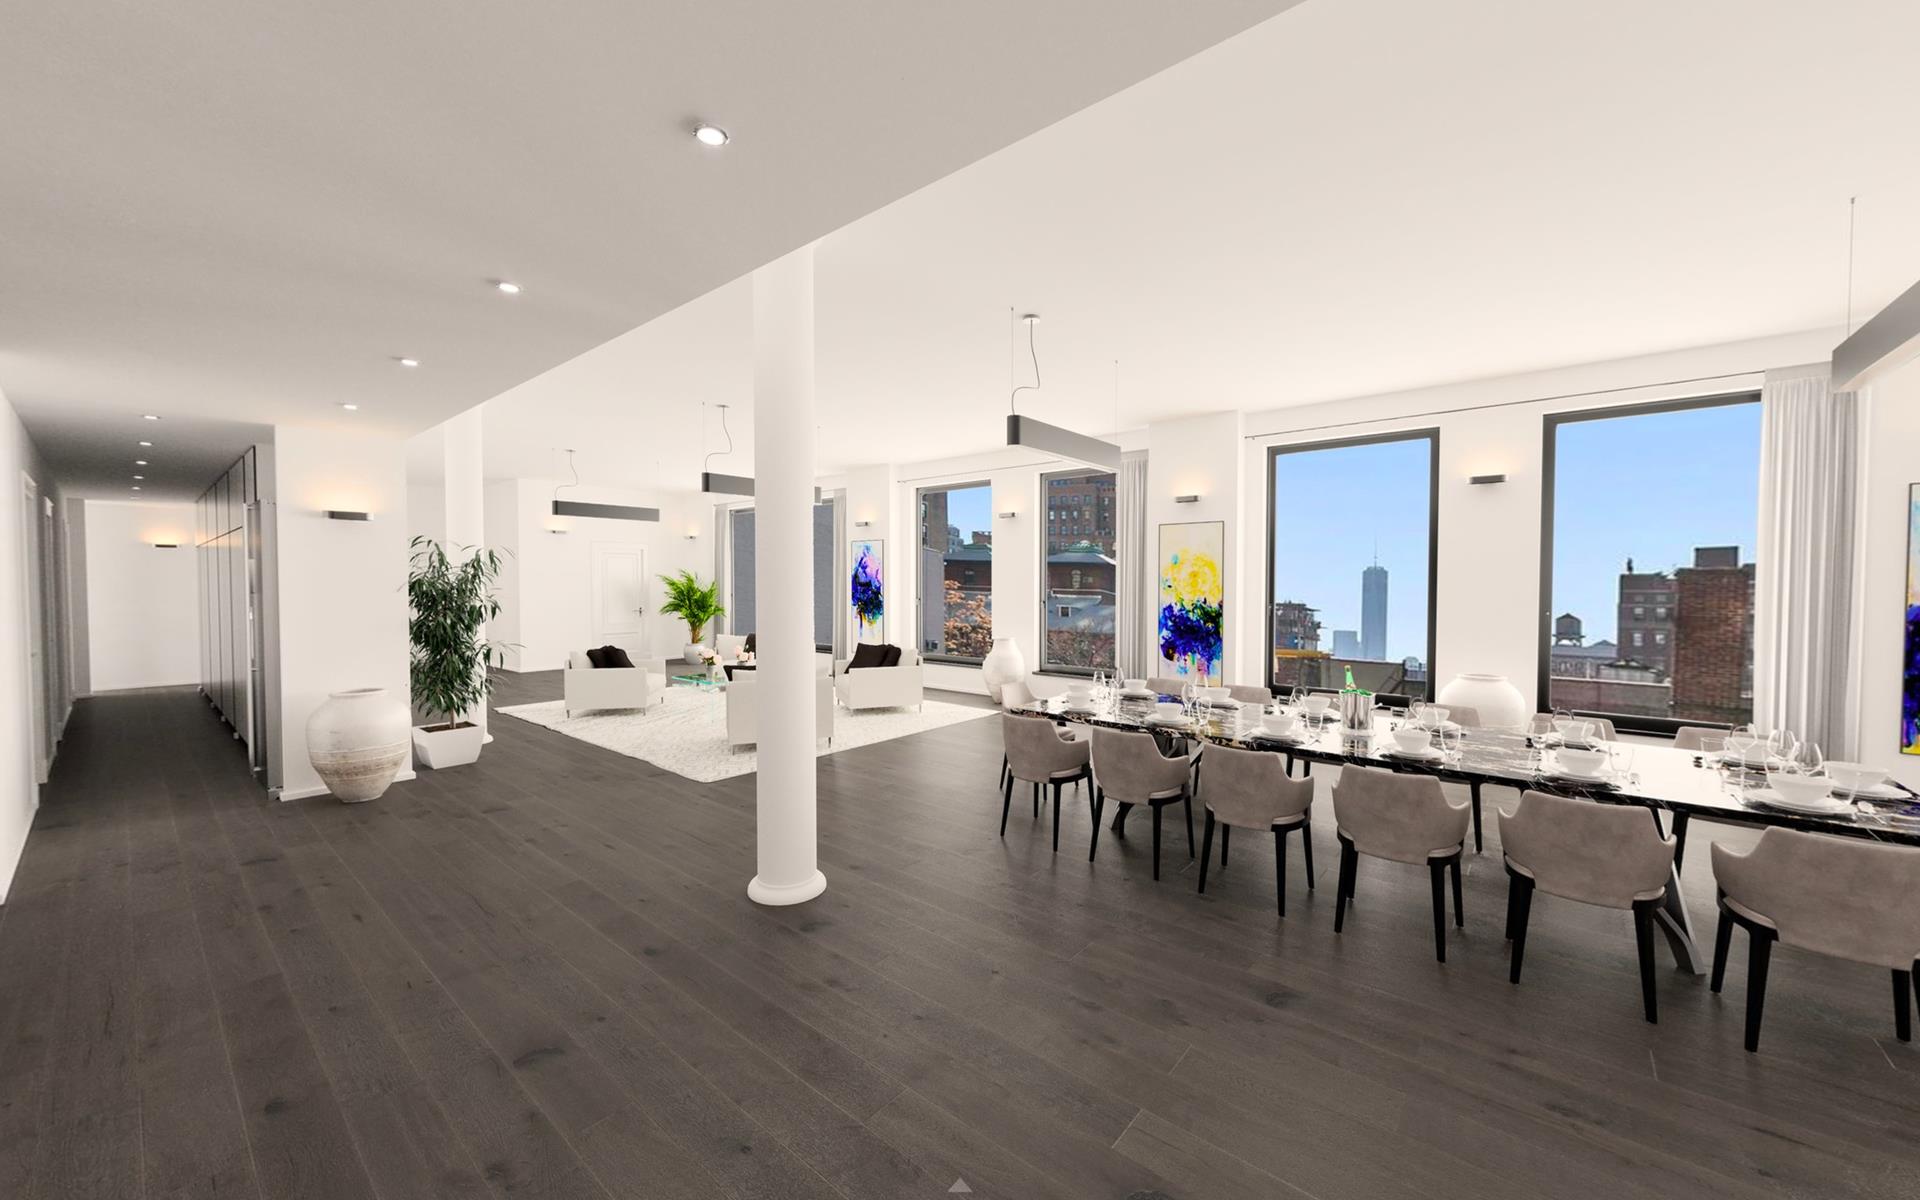 227 West 17th Street 5, Chelsea, Downtown, NYC - 4 Bedrooms  
3 Bathrooms  
8 Rooms - 